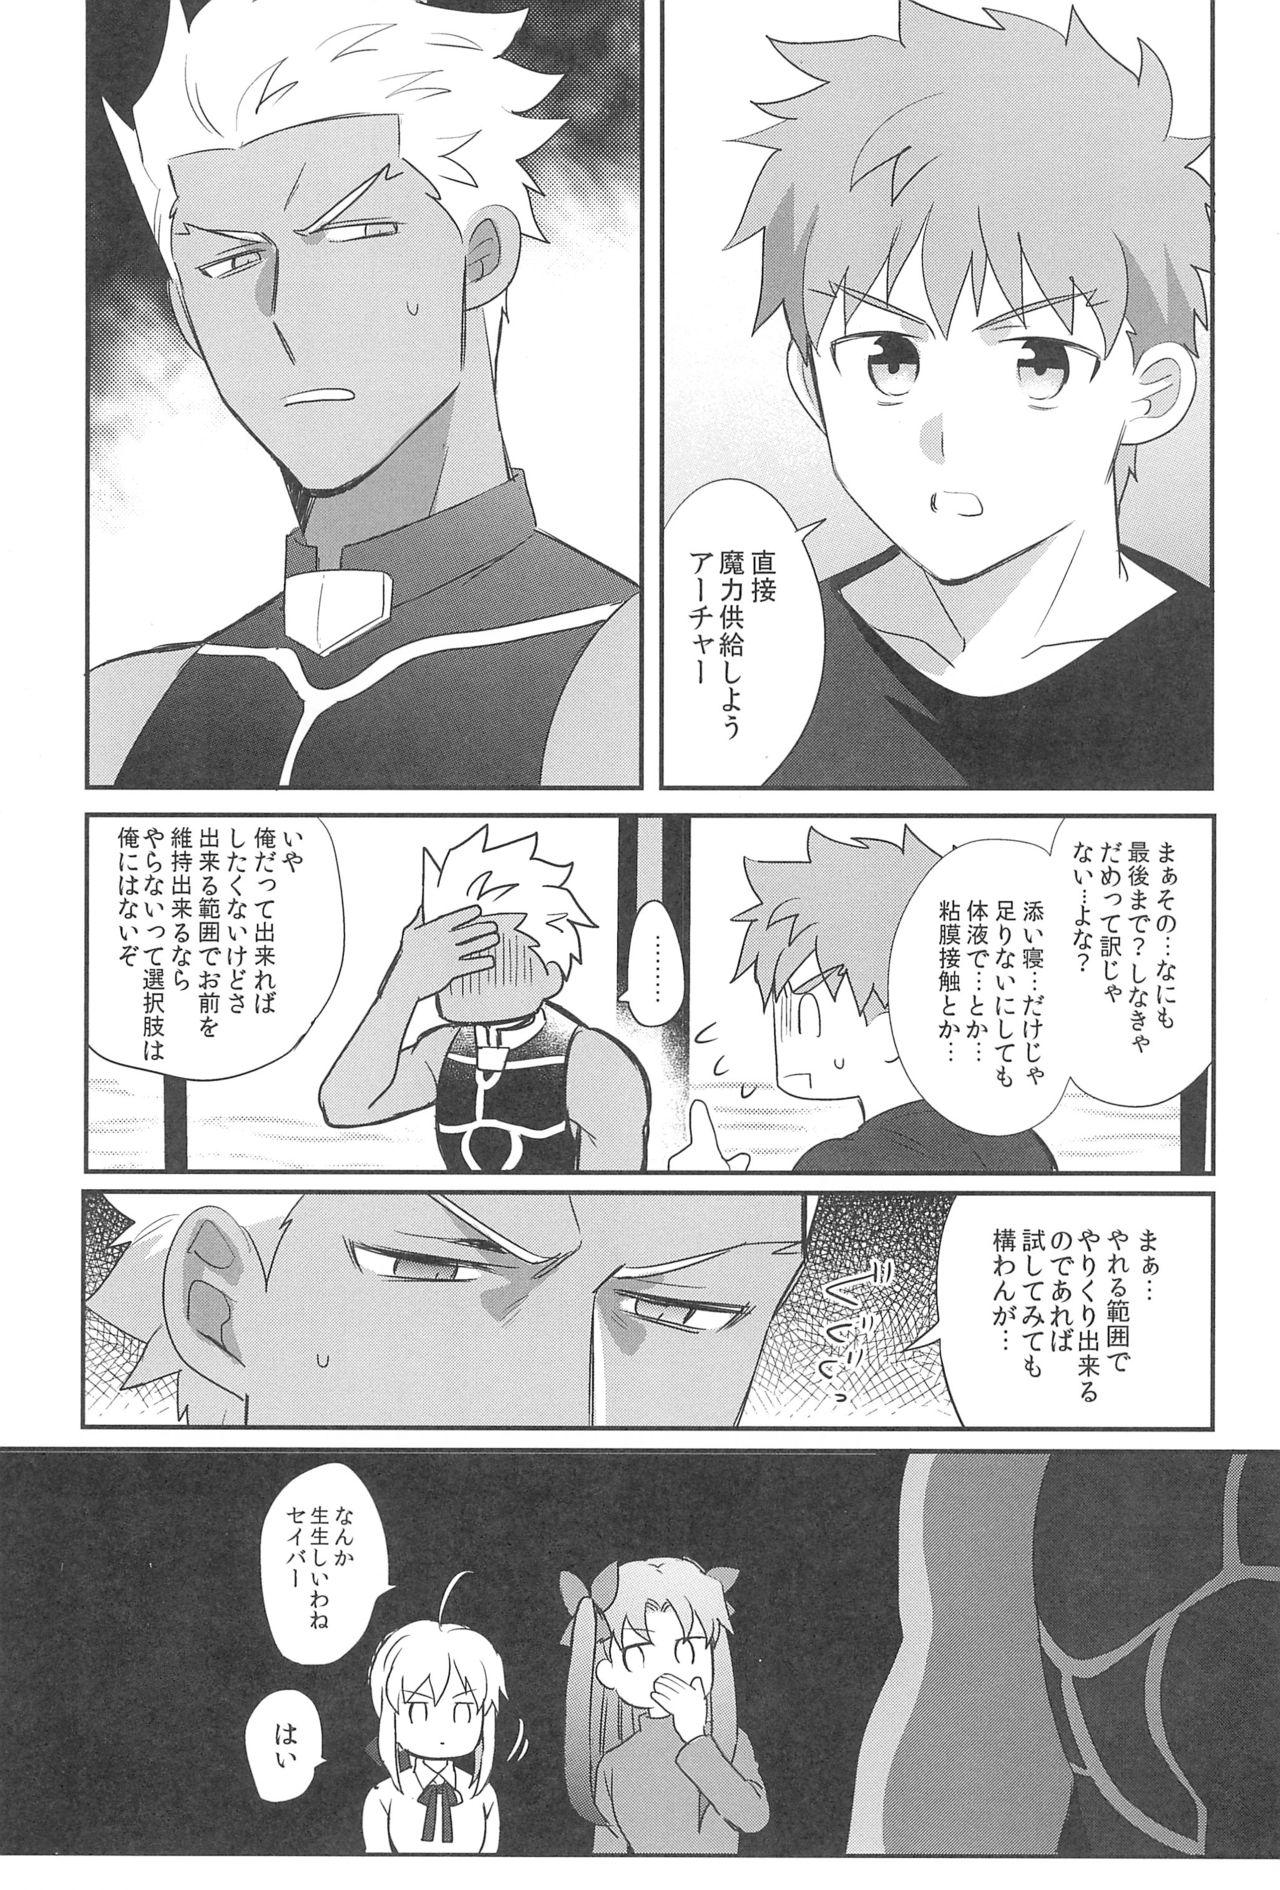 Gostosas Honban NG! - Fate stay night Dyke - Page 7